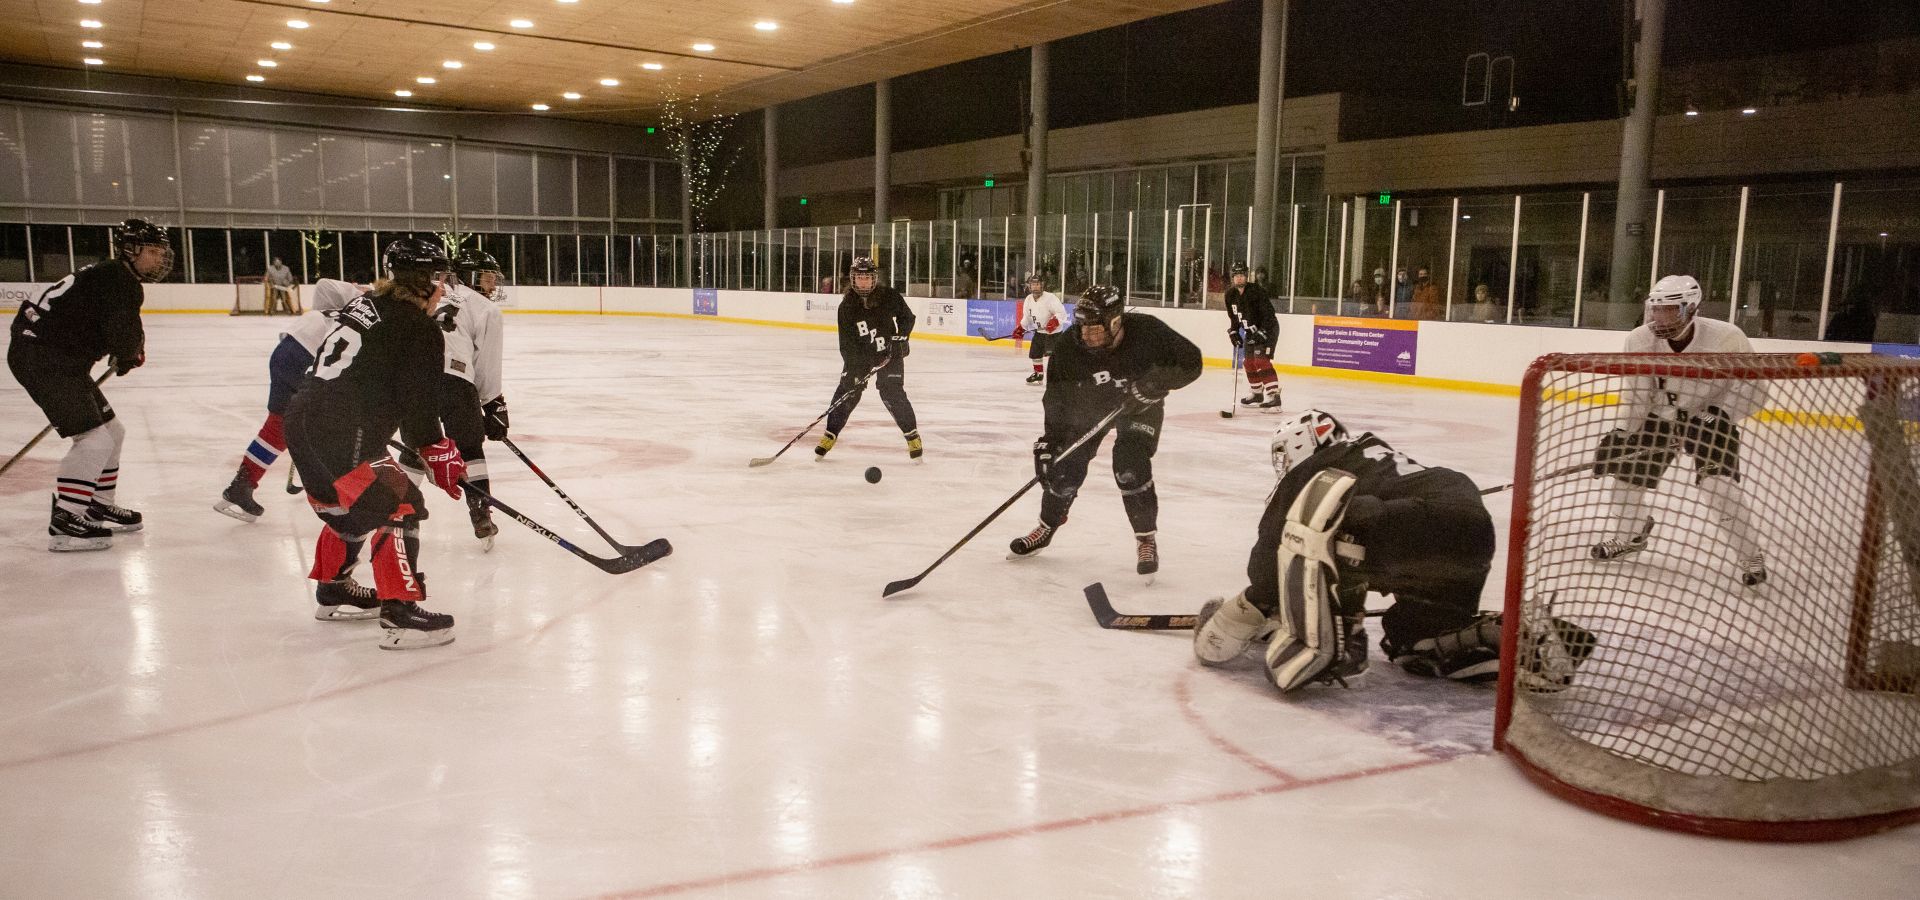 adult hockey players at the pavilion